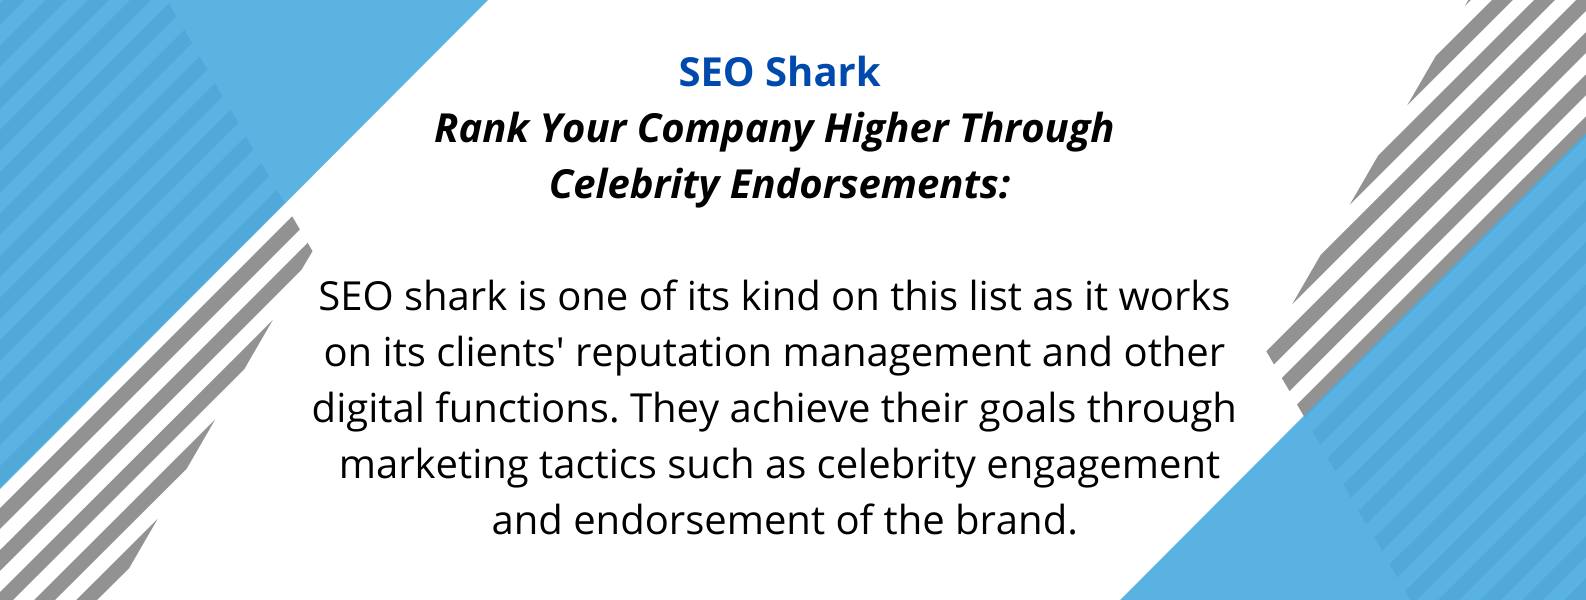 Unique Selling Proposition of SEO Shark - one of the best SEO agencies in Australia